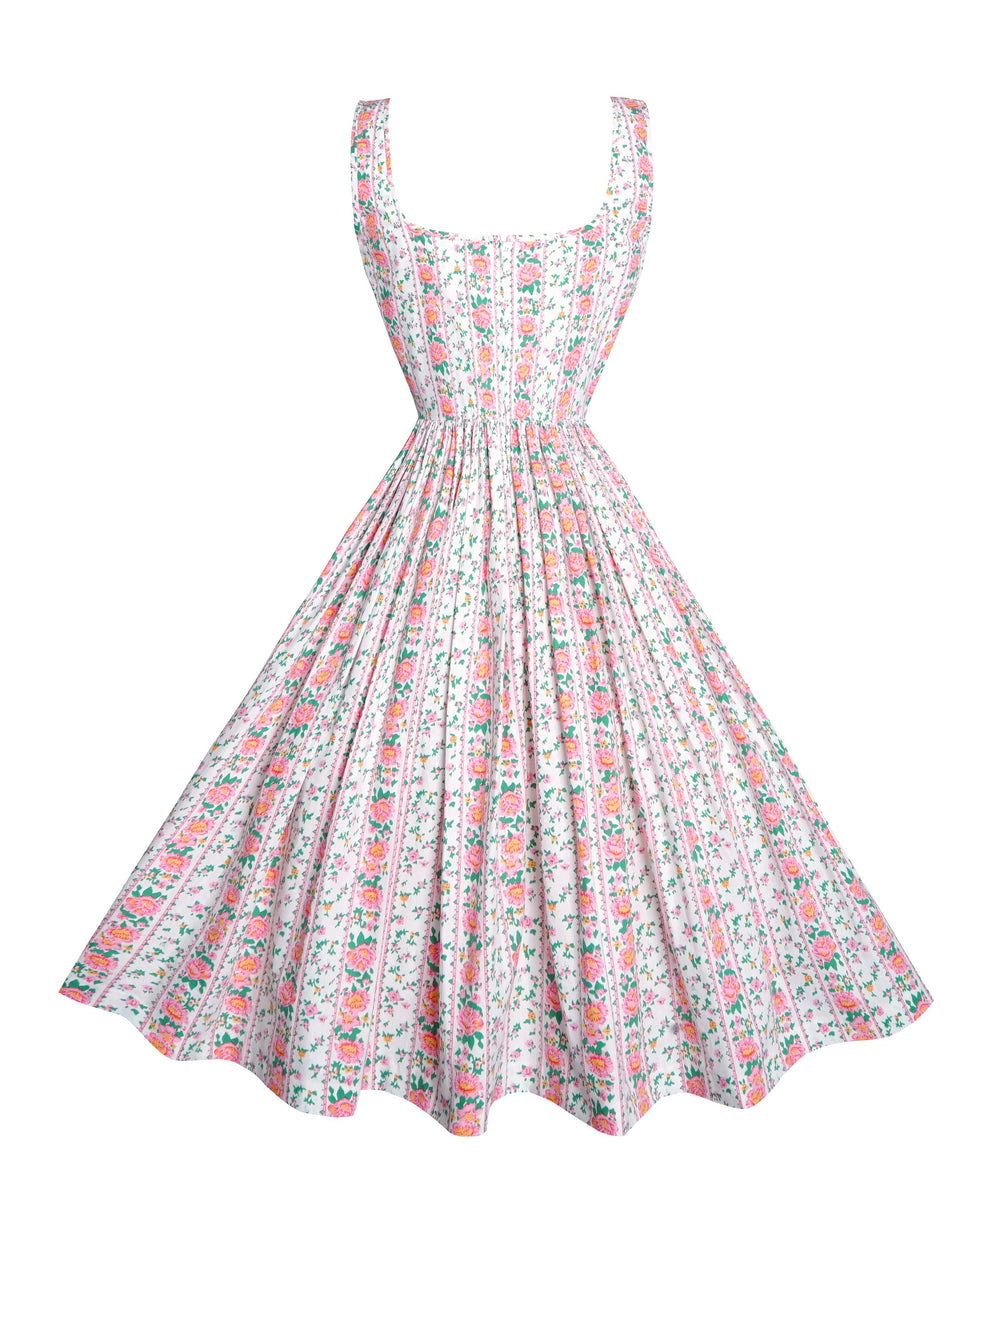 MTO - Michelle Dress Pink "Country Cottage Floral"